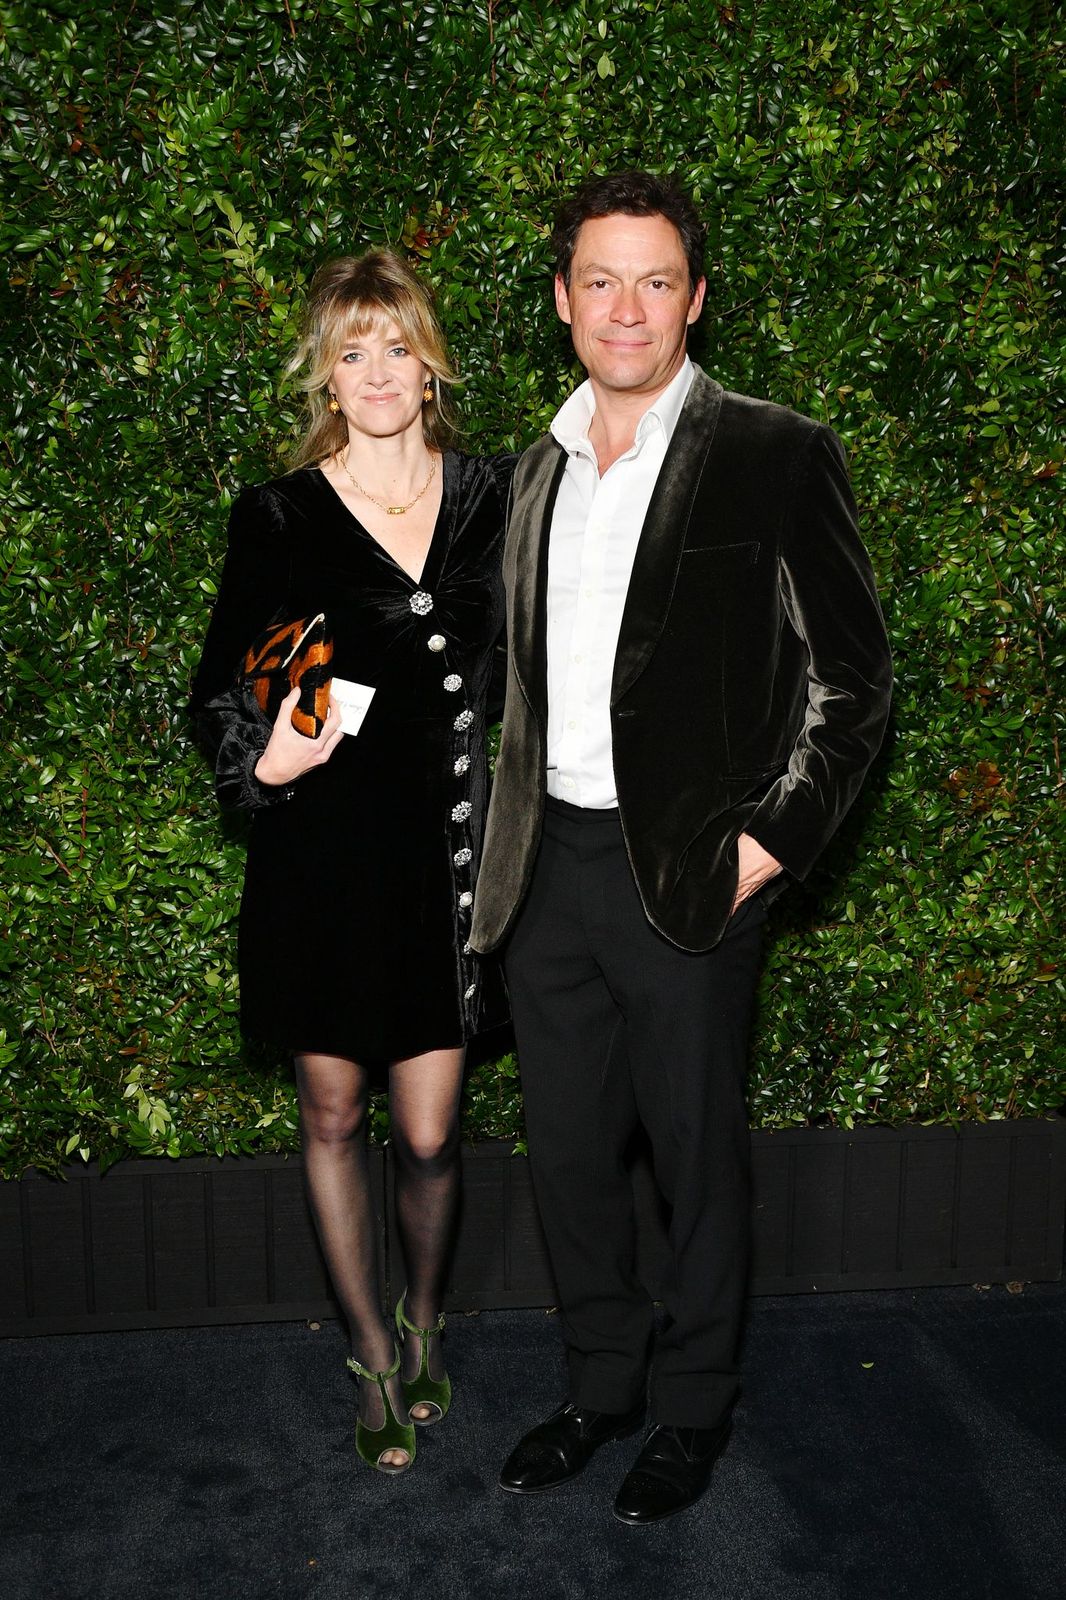 Catherine Fitzgerald and Dominic West at the Chanel And Charles Finch Pre-Oscar Awards Dinner on February 23, 2019, in Beverly Hills, California | Photo: Getty Images